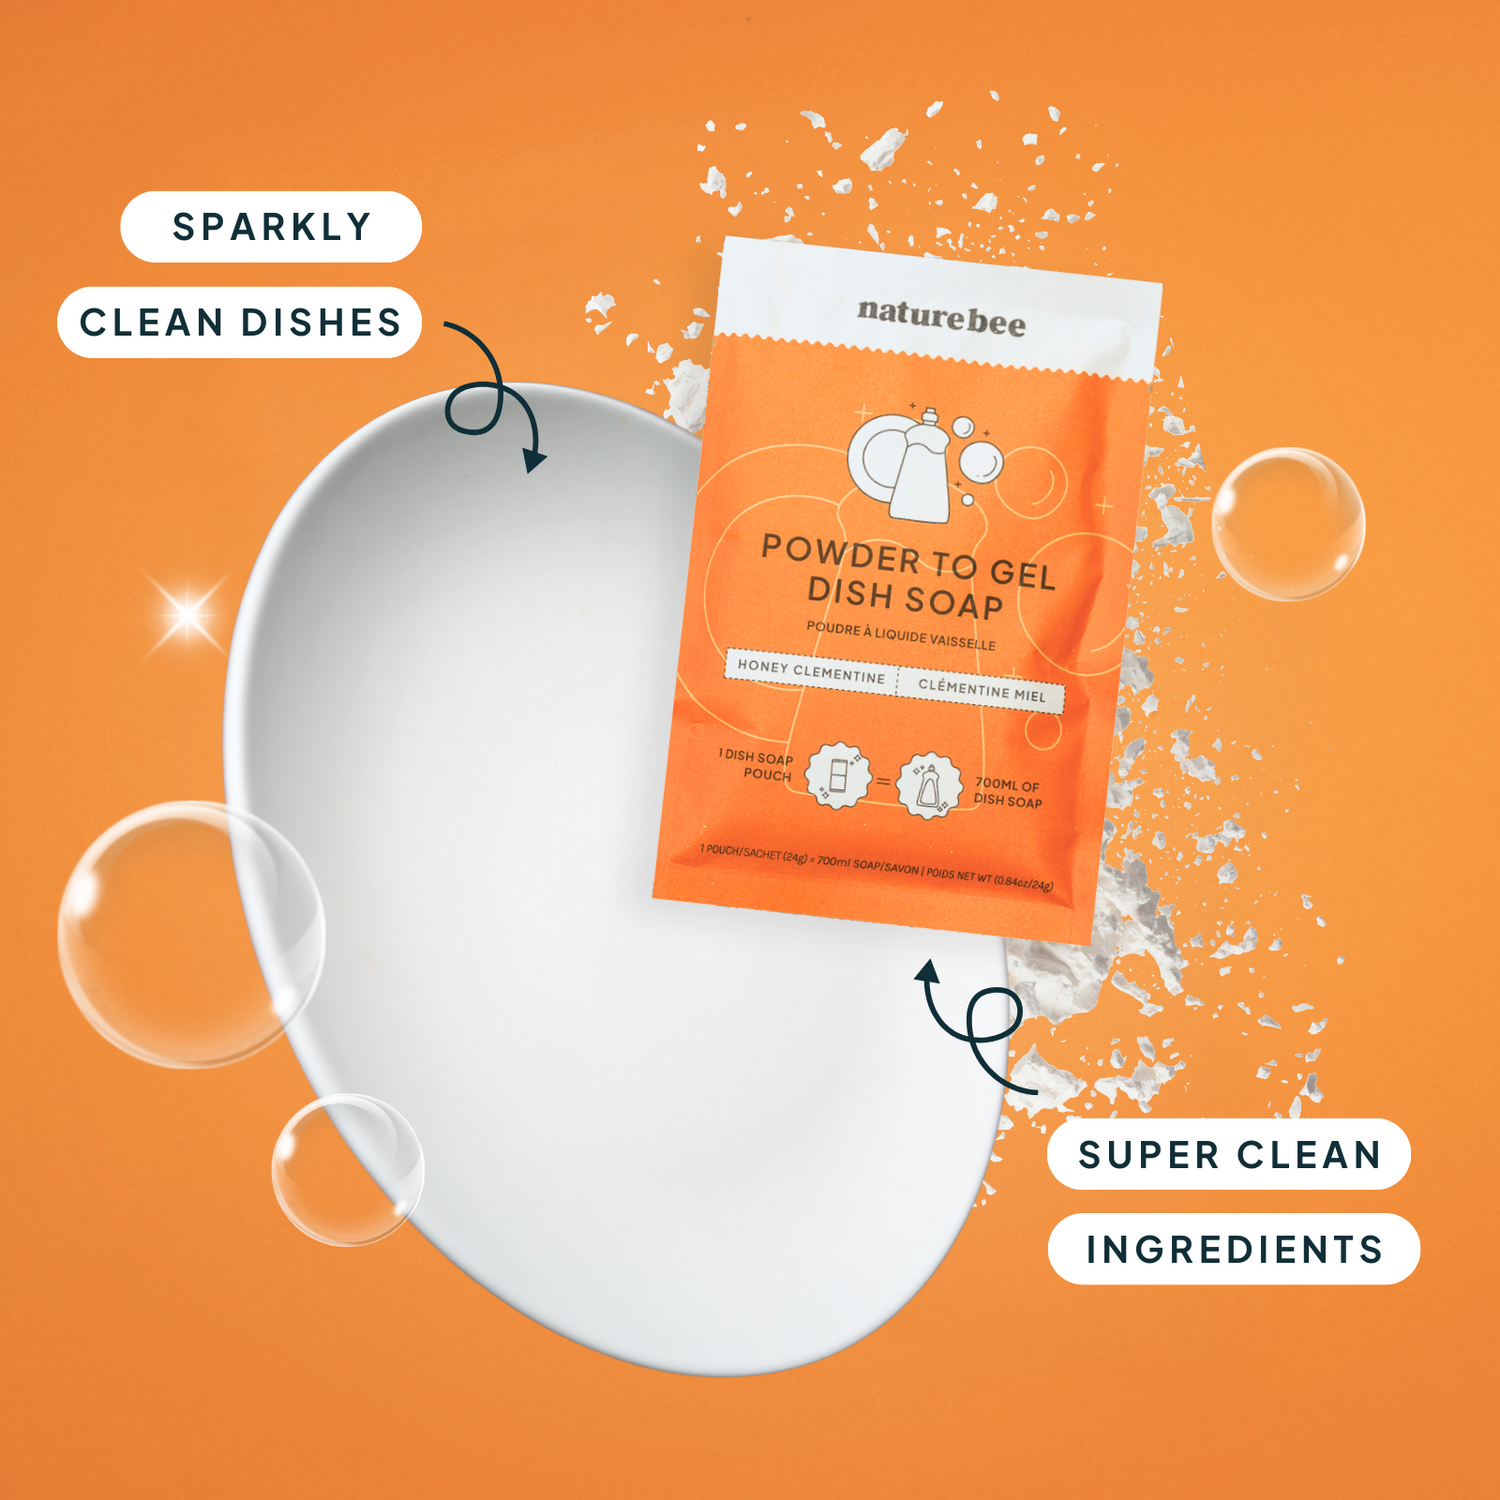 The Future of Clean: Introducing Our Powder-to-Gel Dish Soap